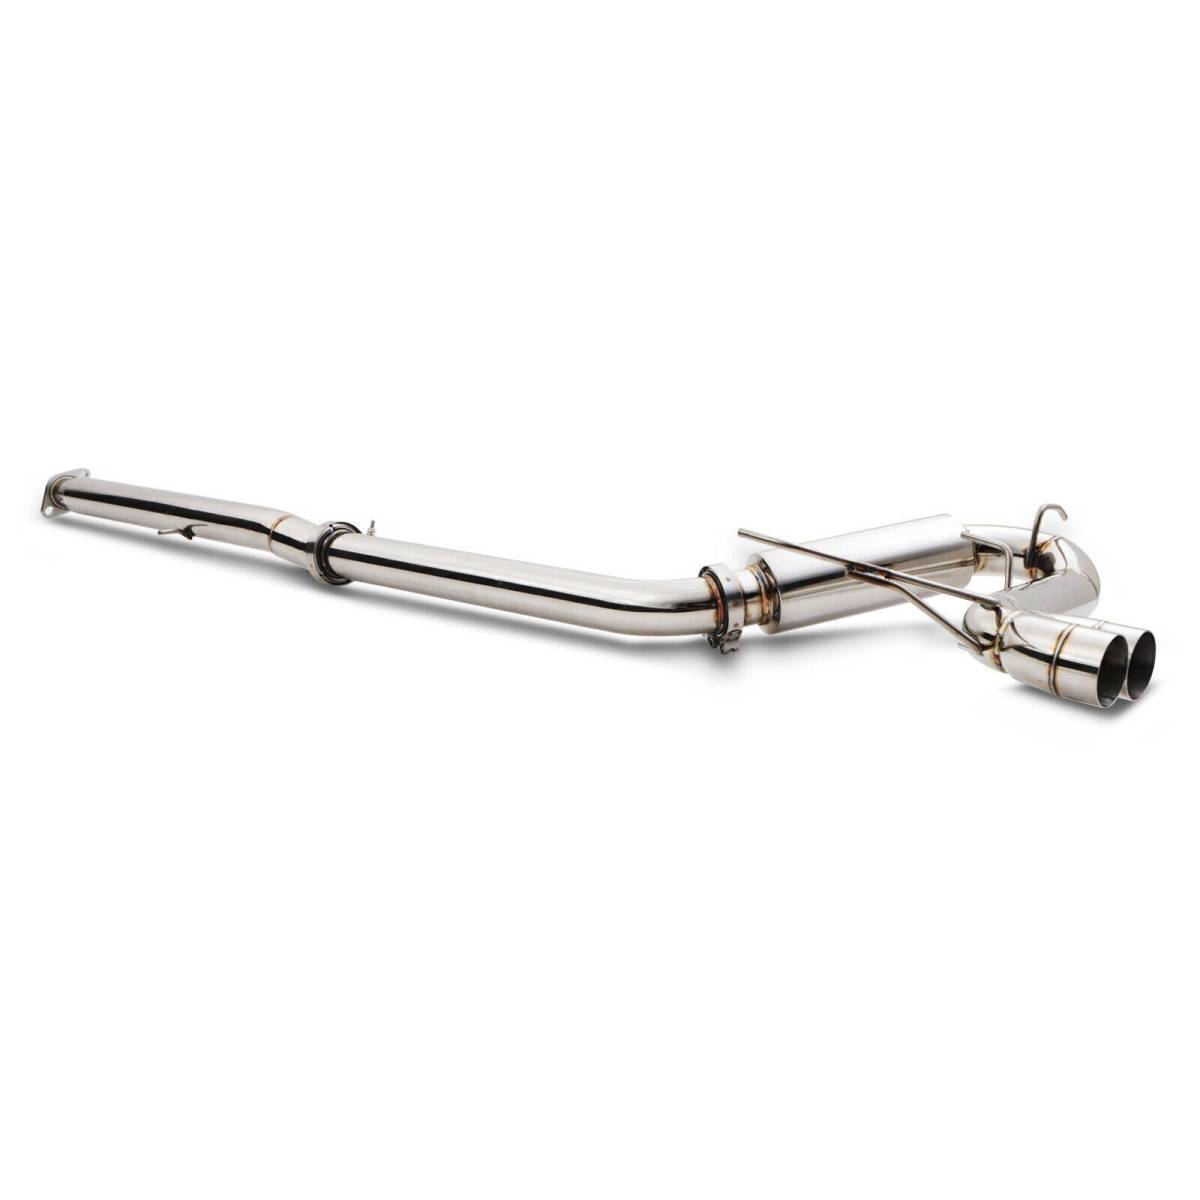 2001-2003 BMW MINI Mini Cooper S 1.6L R53 stainless steel exhaust muffler my change front for new goods 